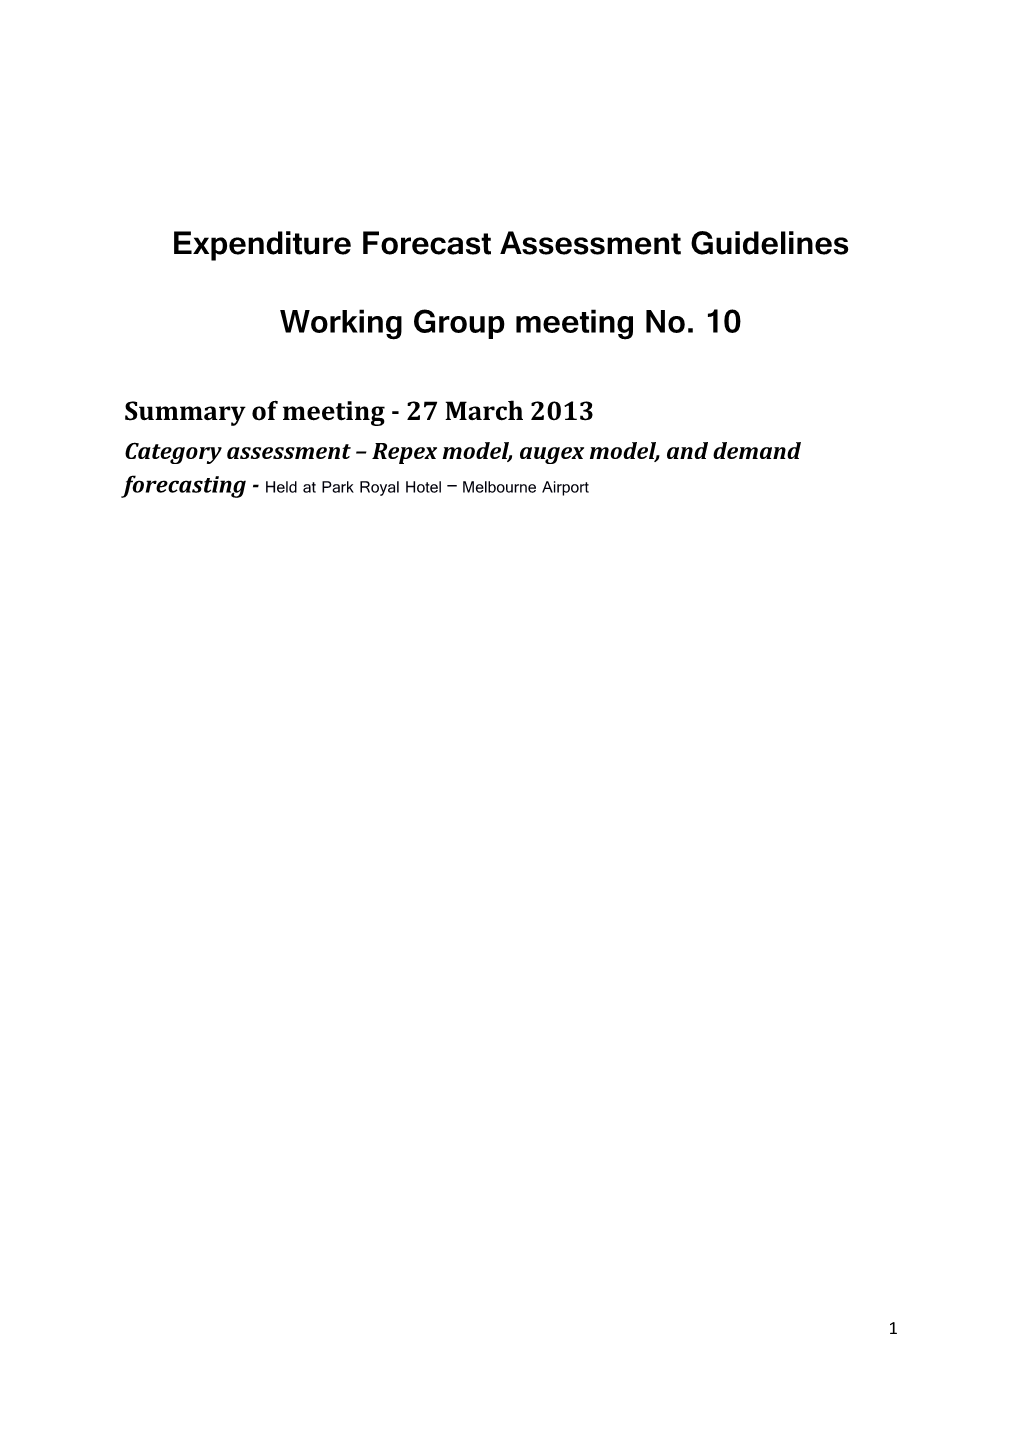 Expenditure Forecast Assessment Guidelines Working Group 2 Meeting - 28 February 2013